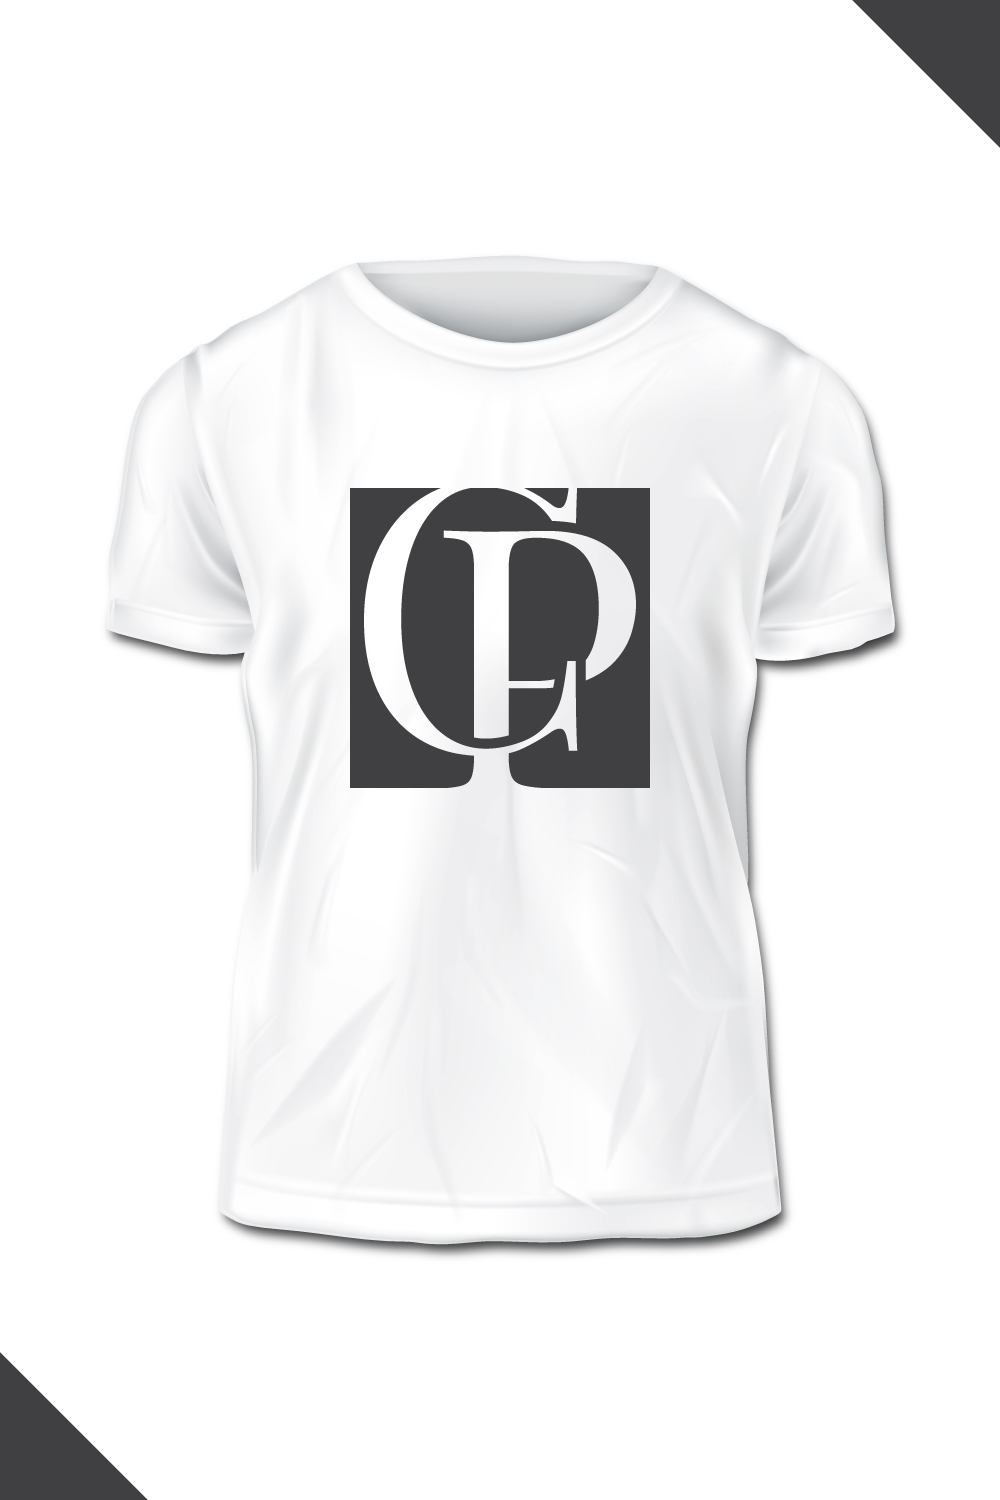 CP logo Design and T-shirt Design pinterest preview image.